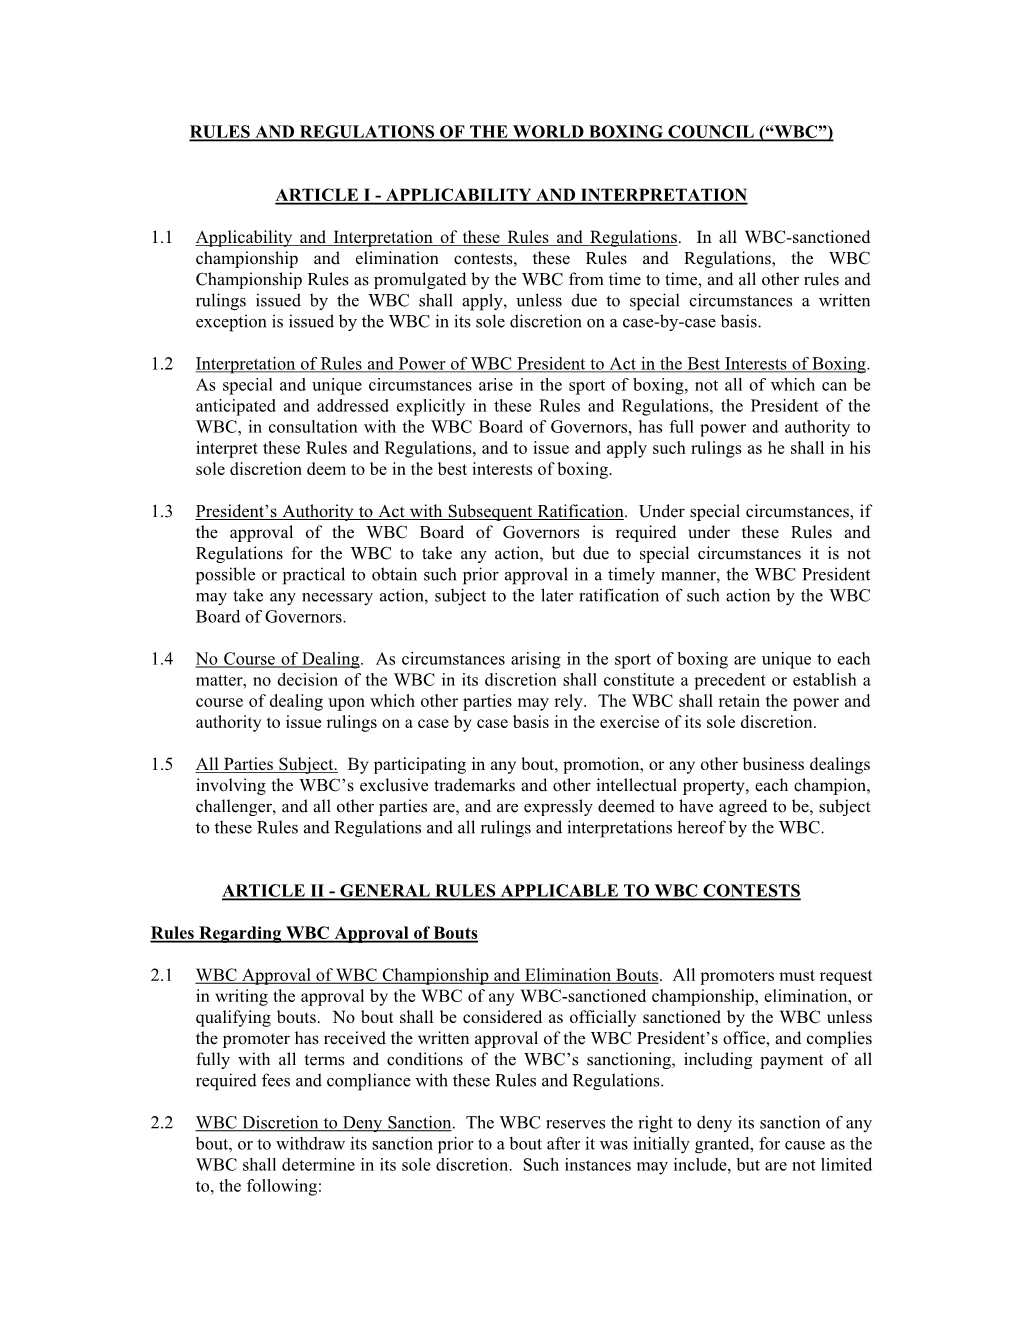 WBC Rules and Regulations Amended and Approved 13 Dec 2011